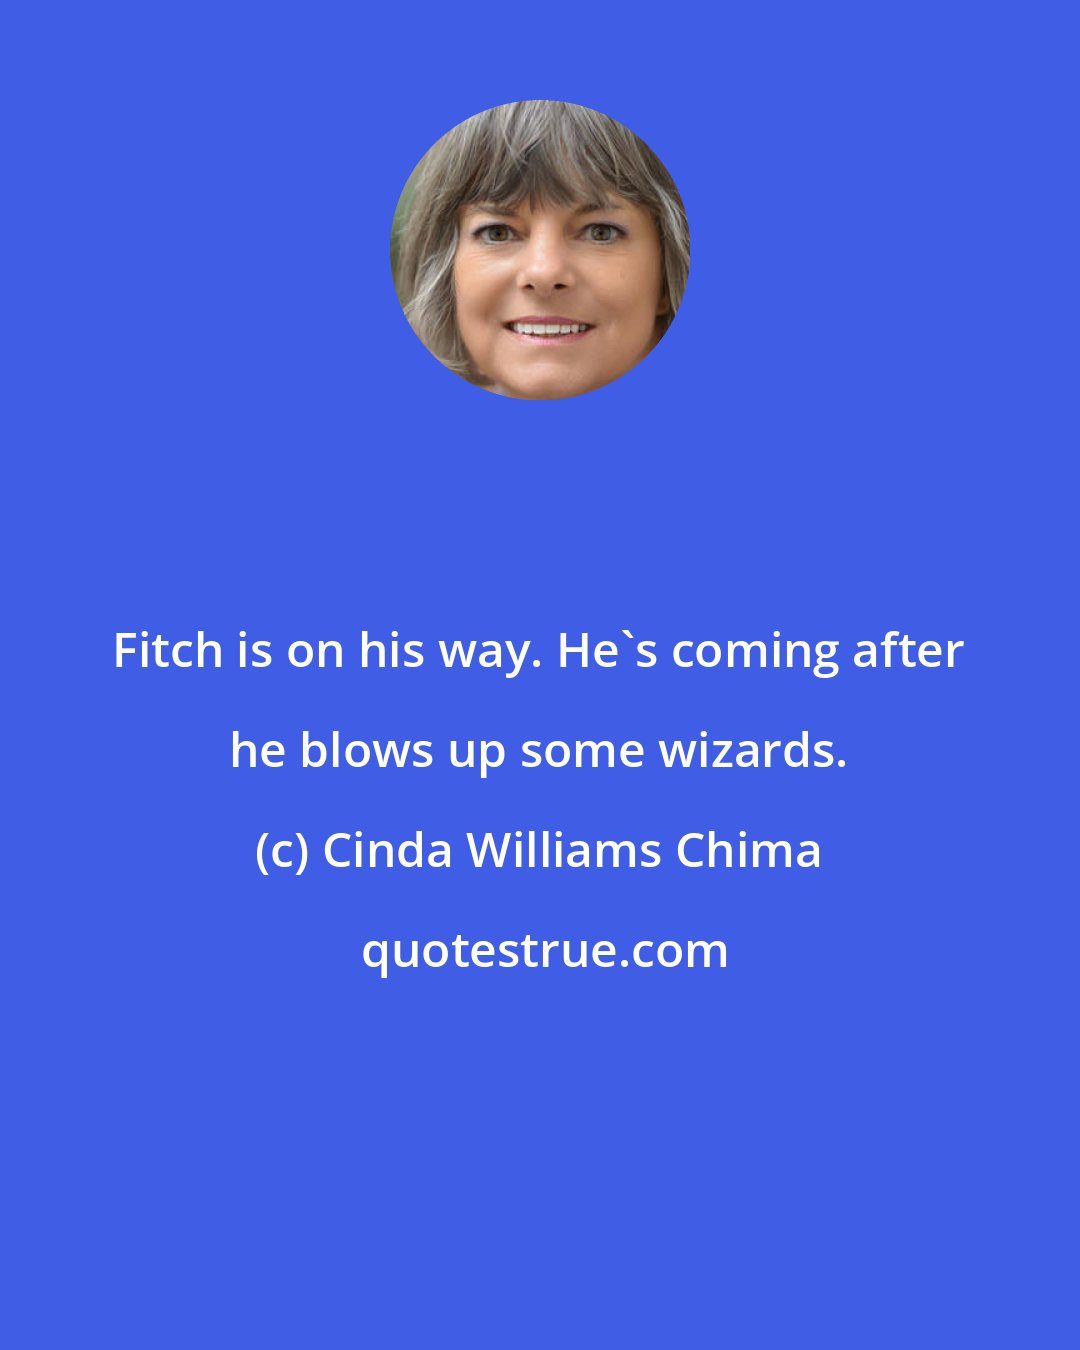 Cinda Williams Chima: Fitch is on his way. He's coming after he blows up some wizards.